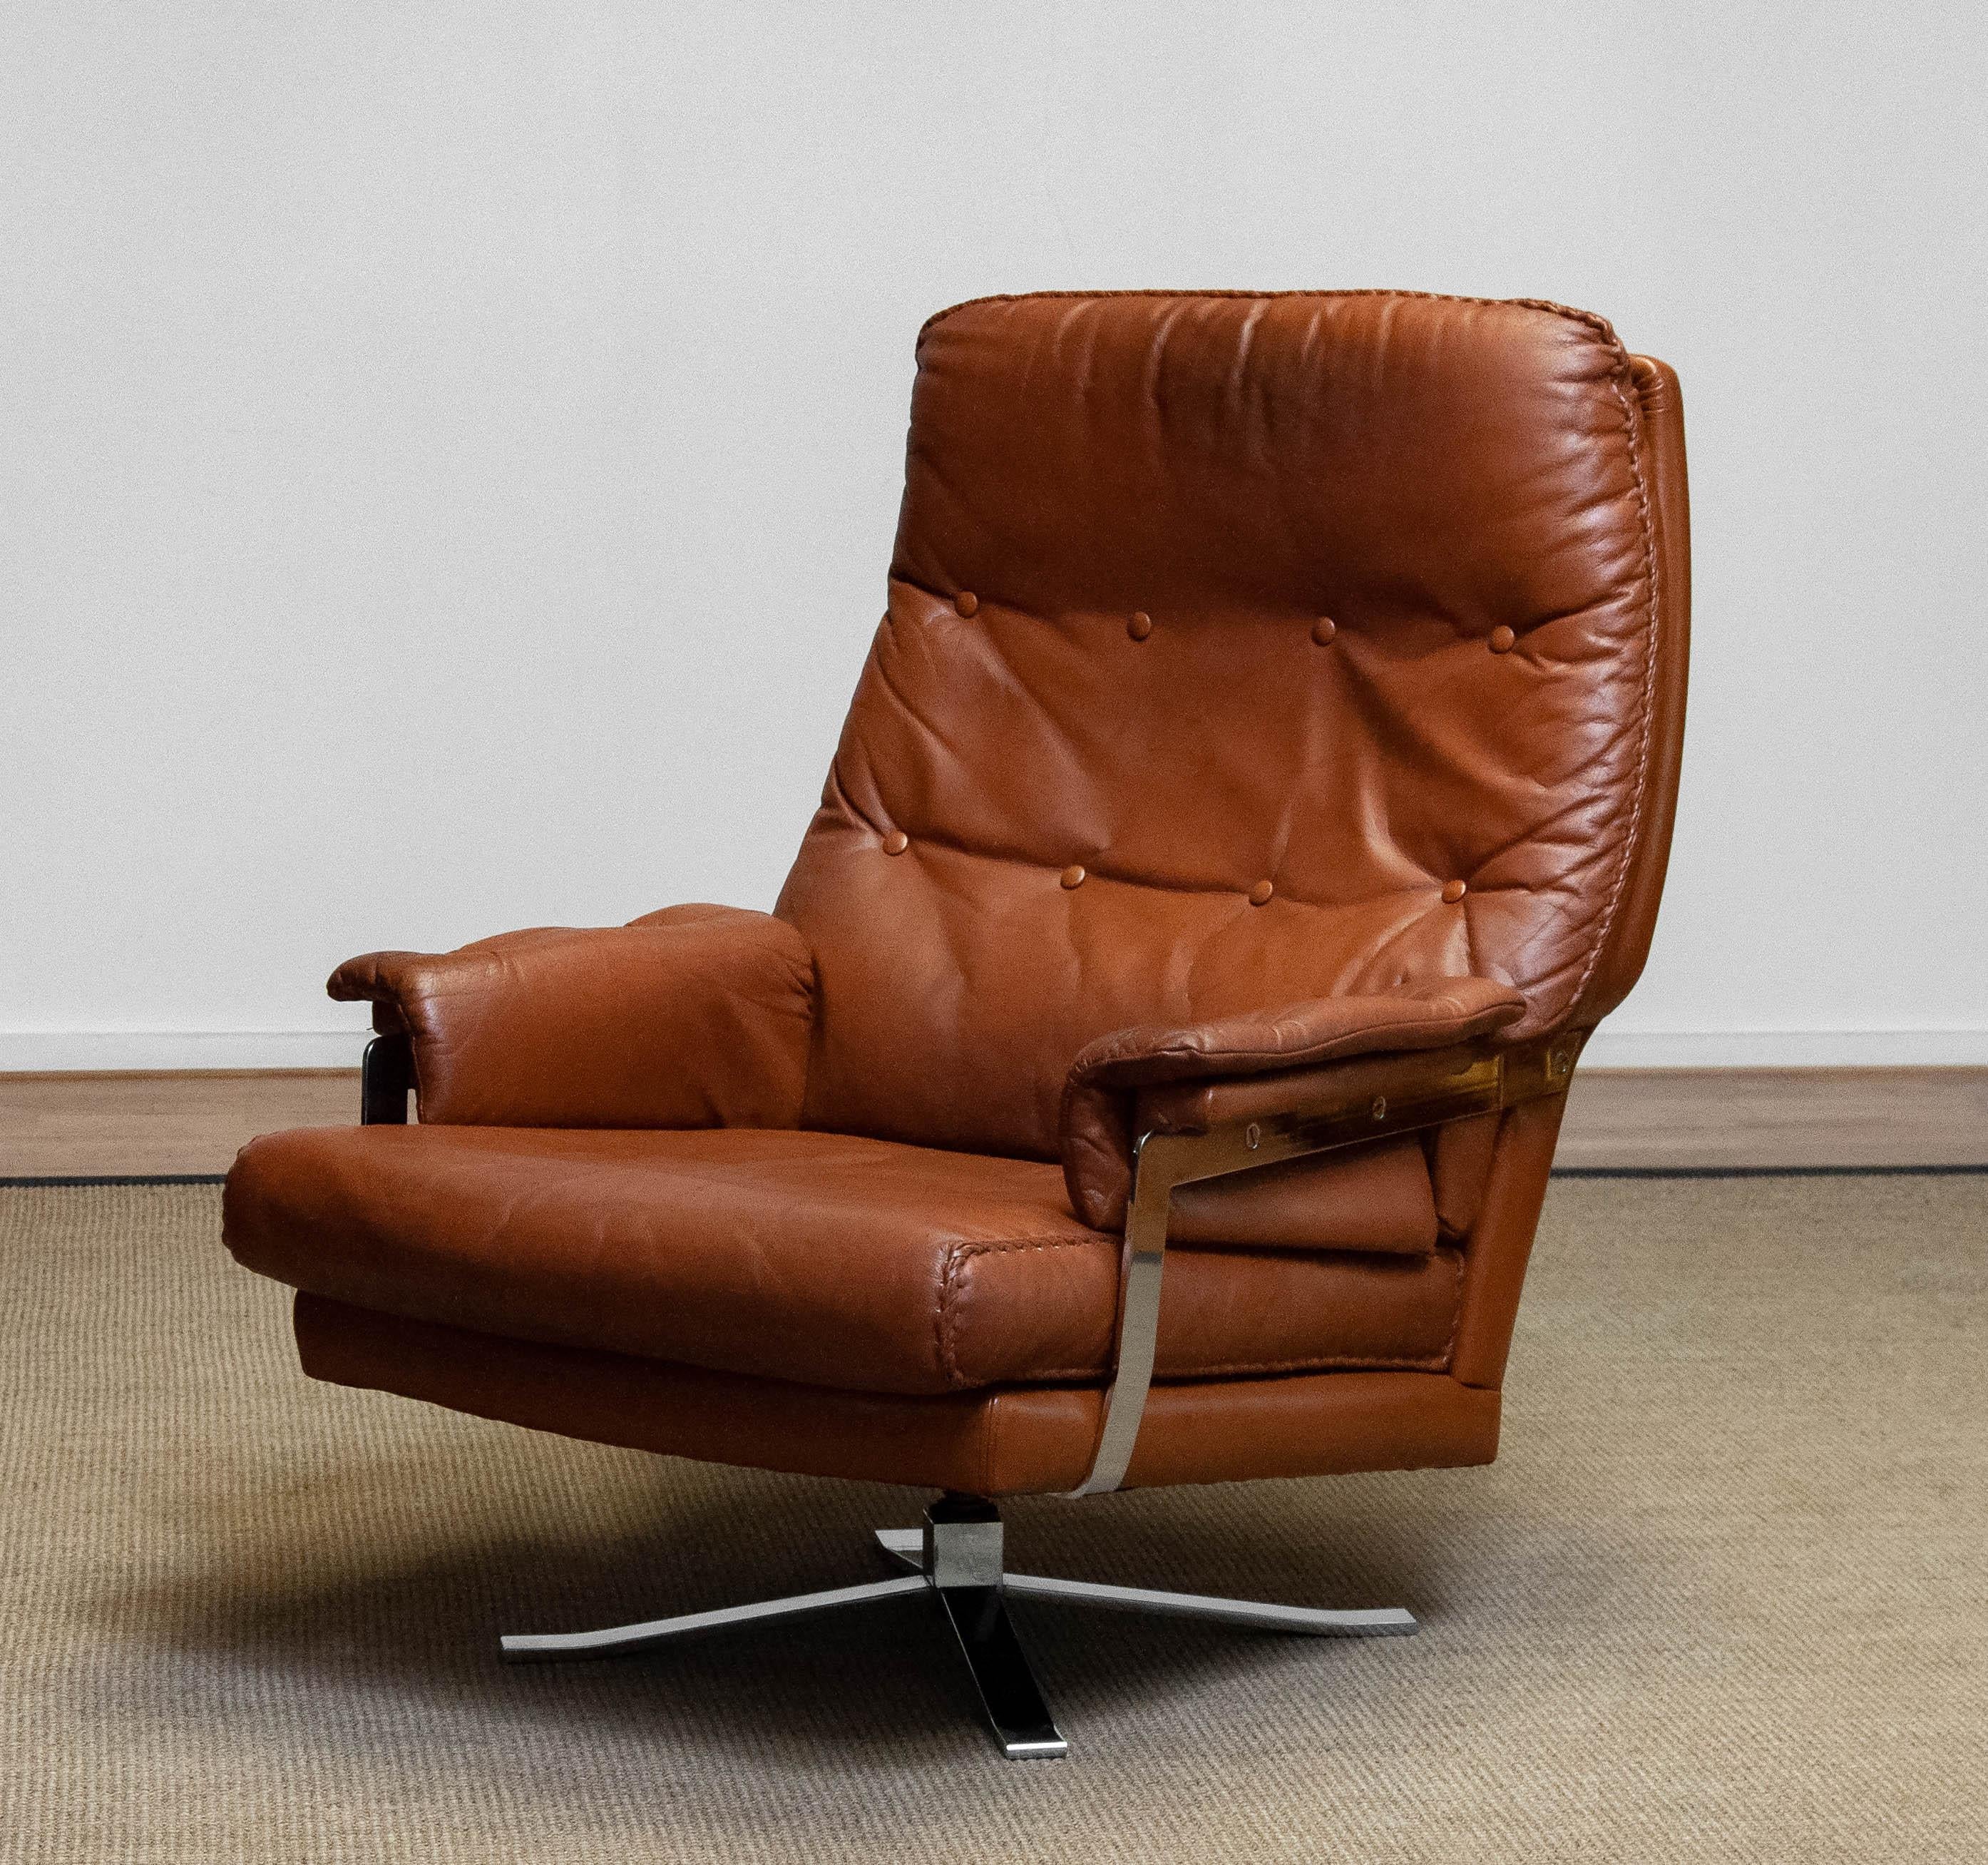 luxury leather recliner chairs